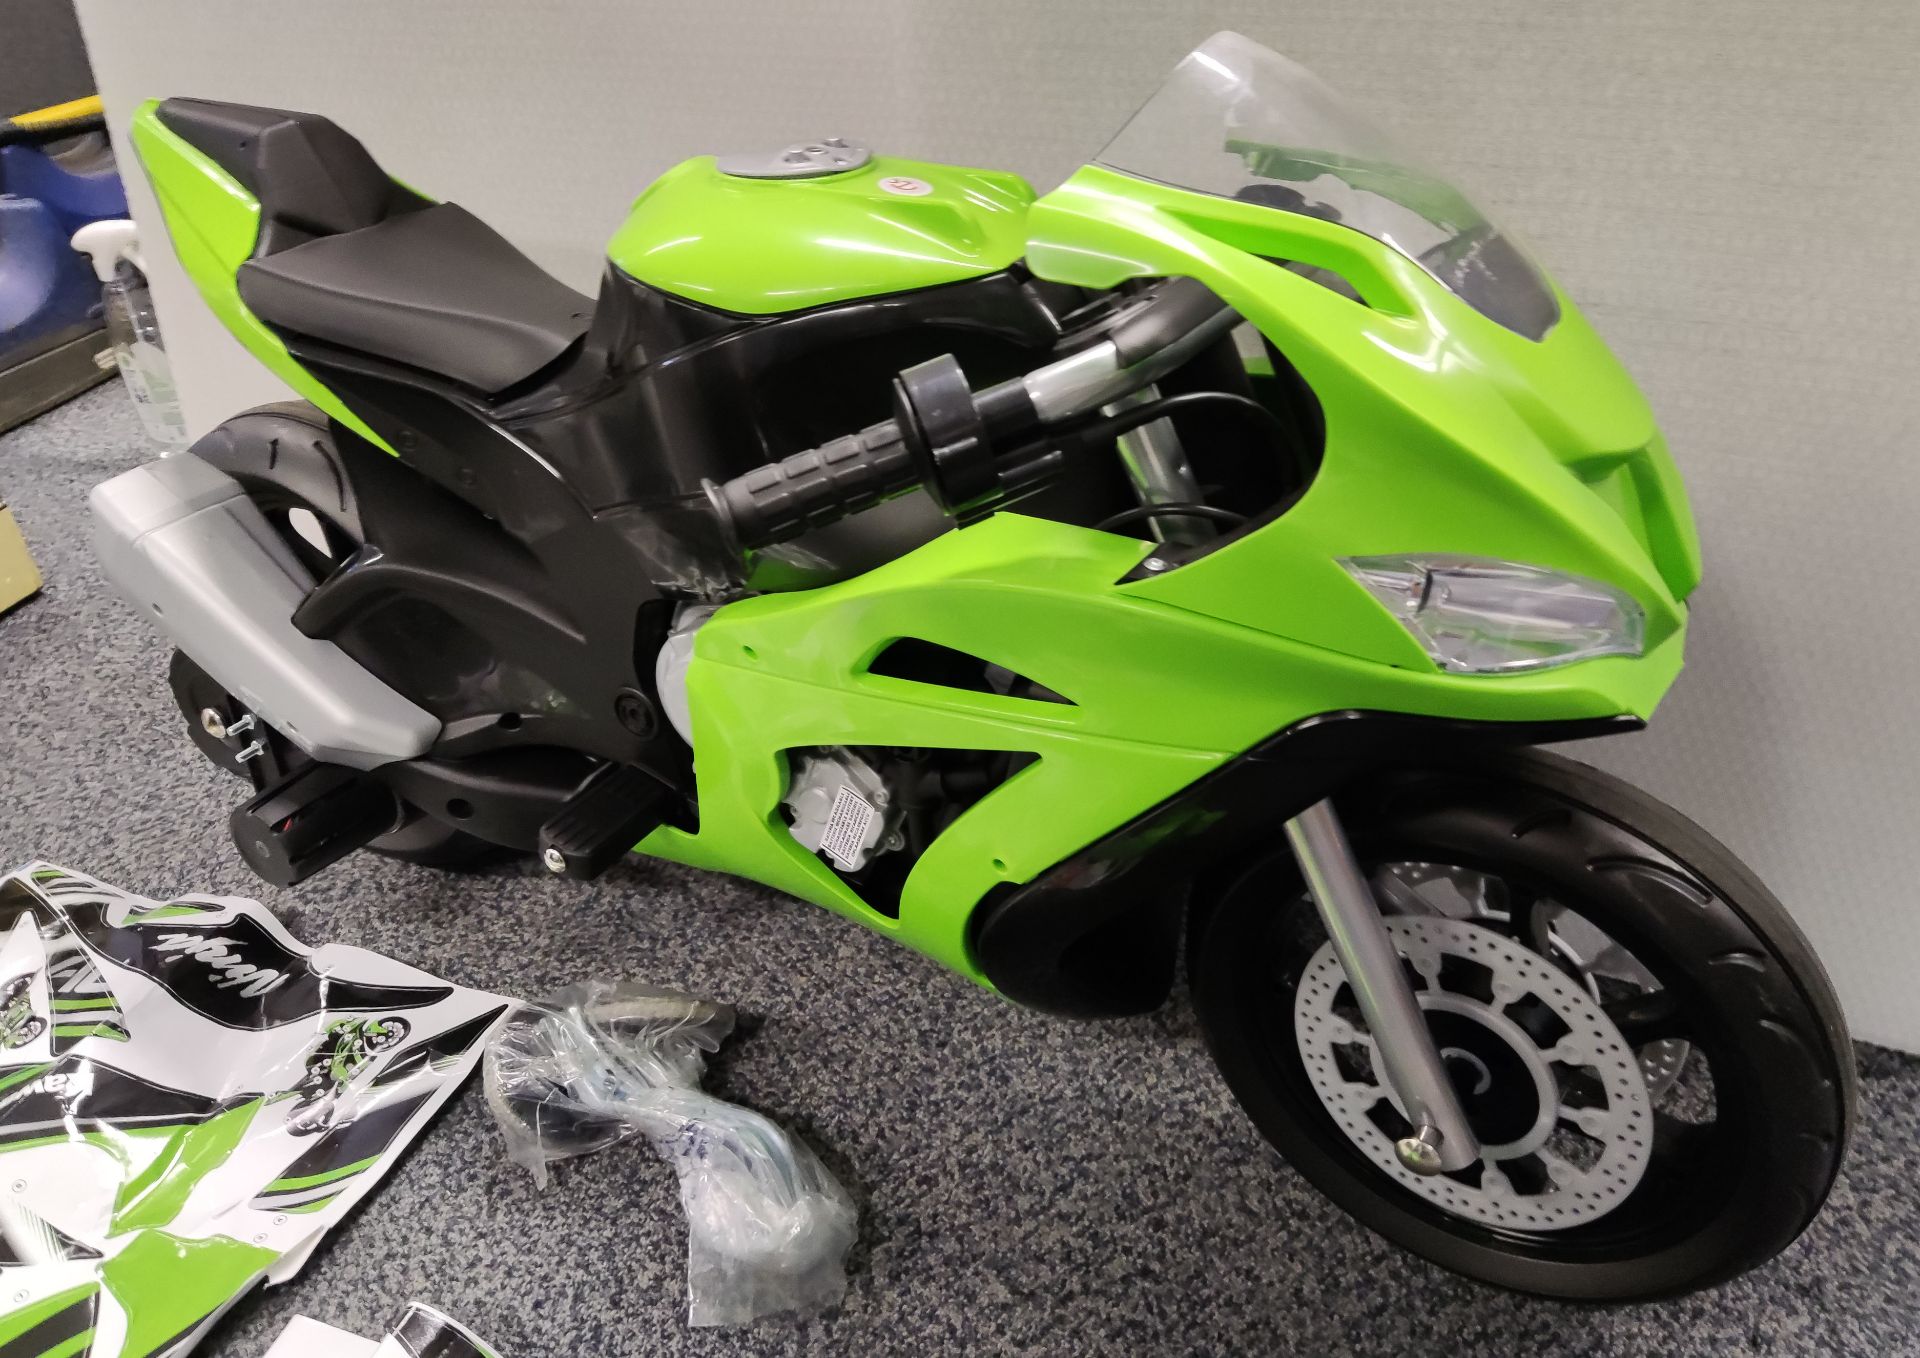 1 x Injusa Kids Electric Ride On Kawasaki ZX10 12V Motorcycle - 6495 - HTYS174 - CL987 - Location: - Image 18 of 24